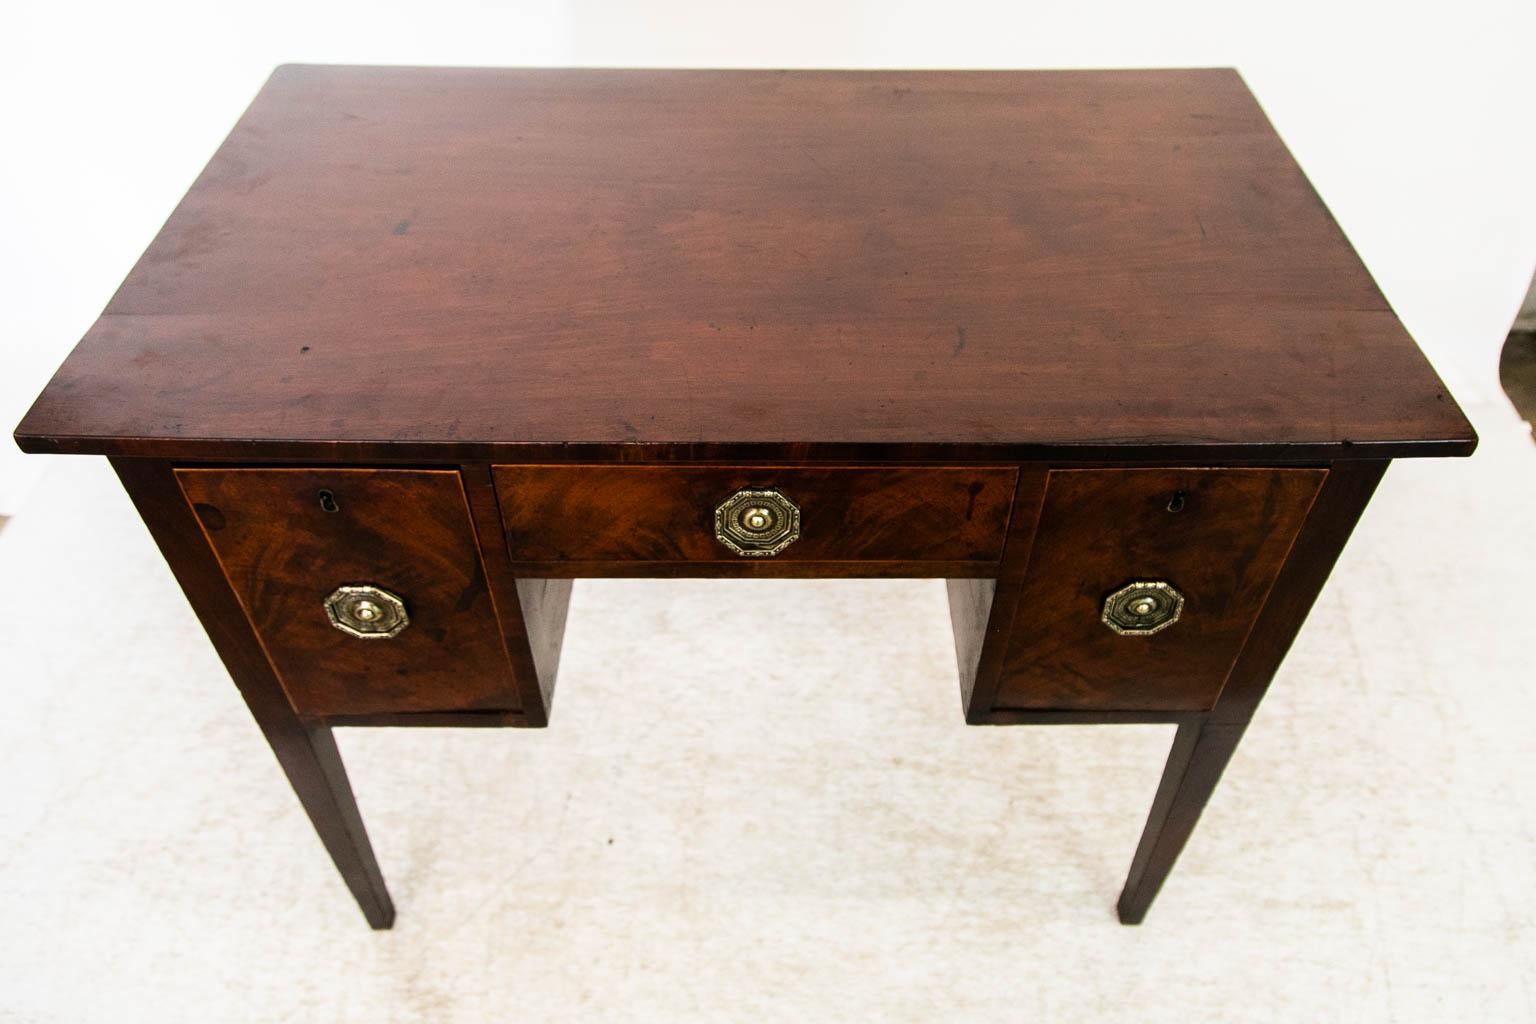 Three Drawer English Mahogany Server/Console Table In Good Condition For Sale In Wilson, NC